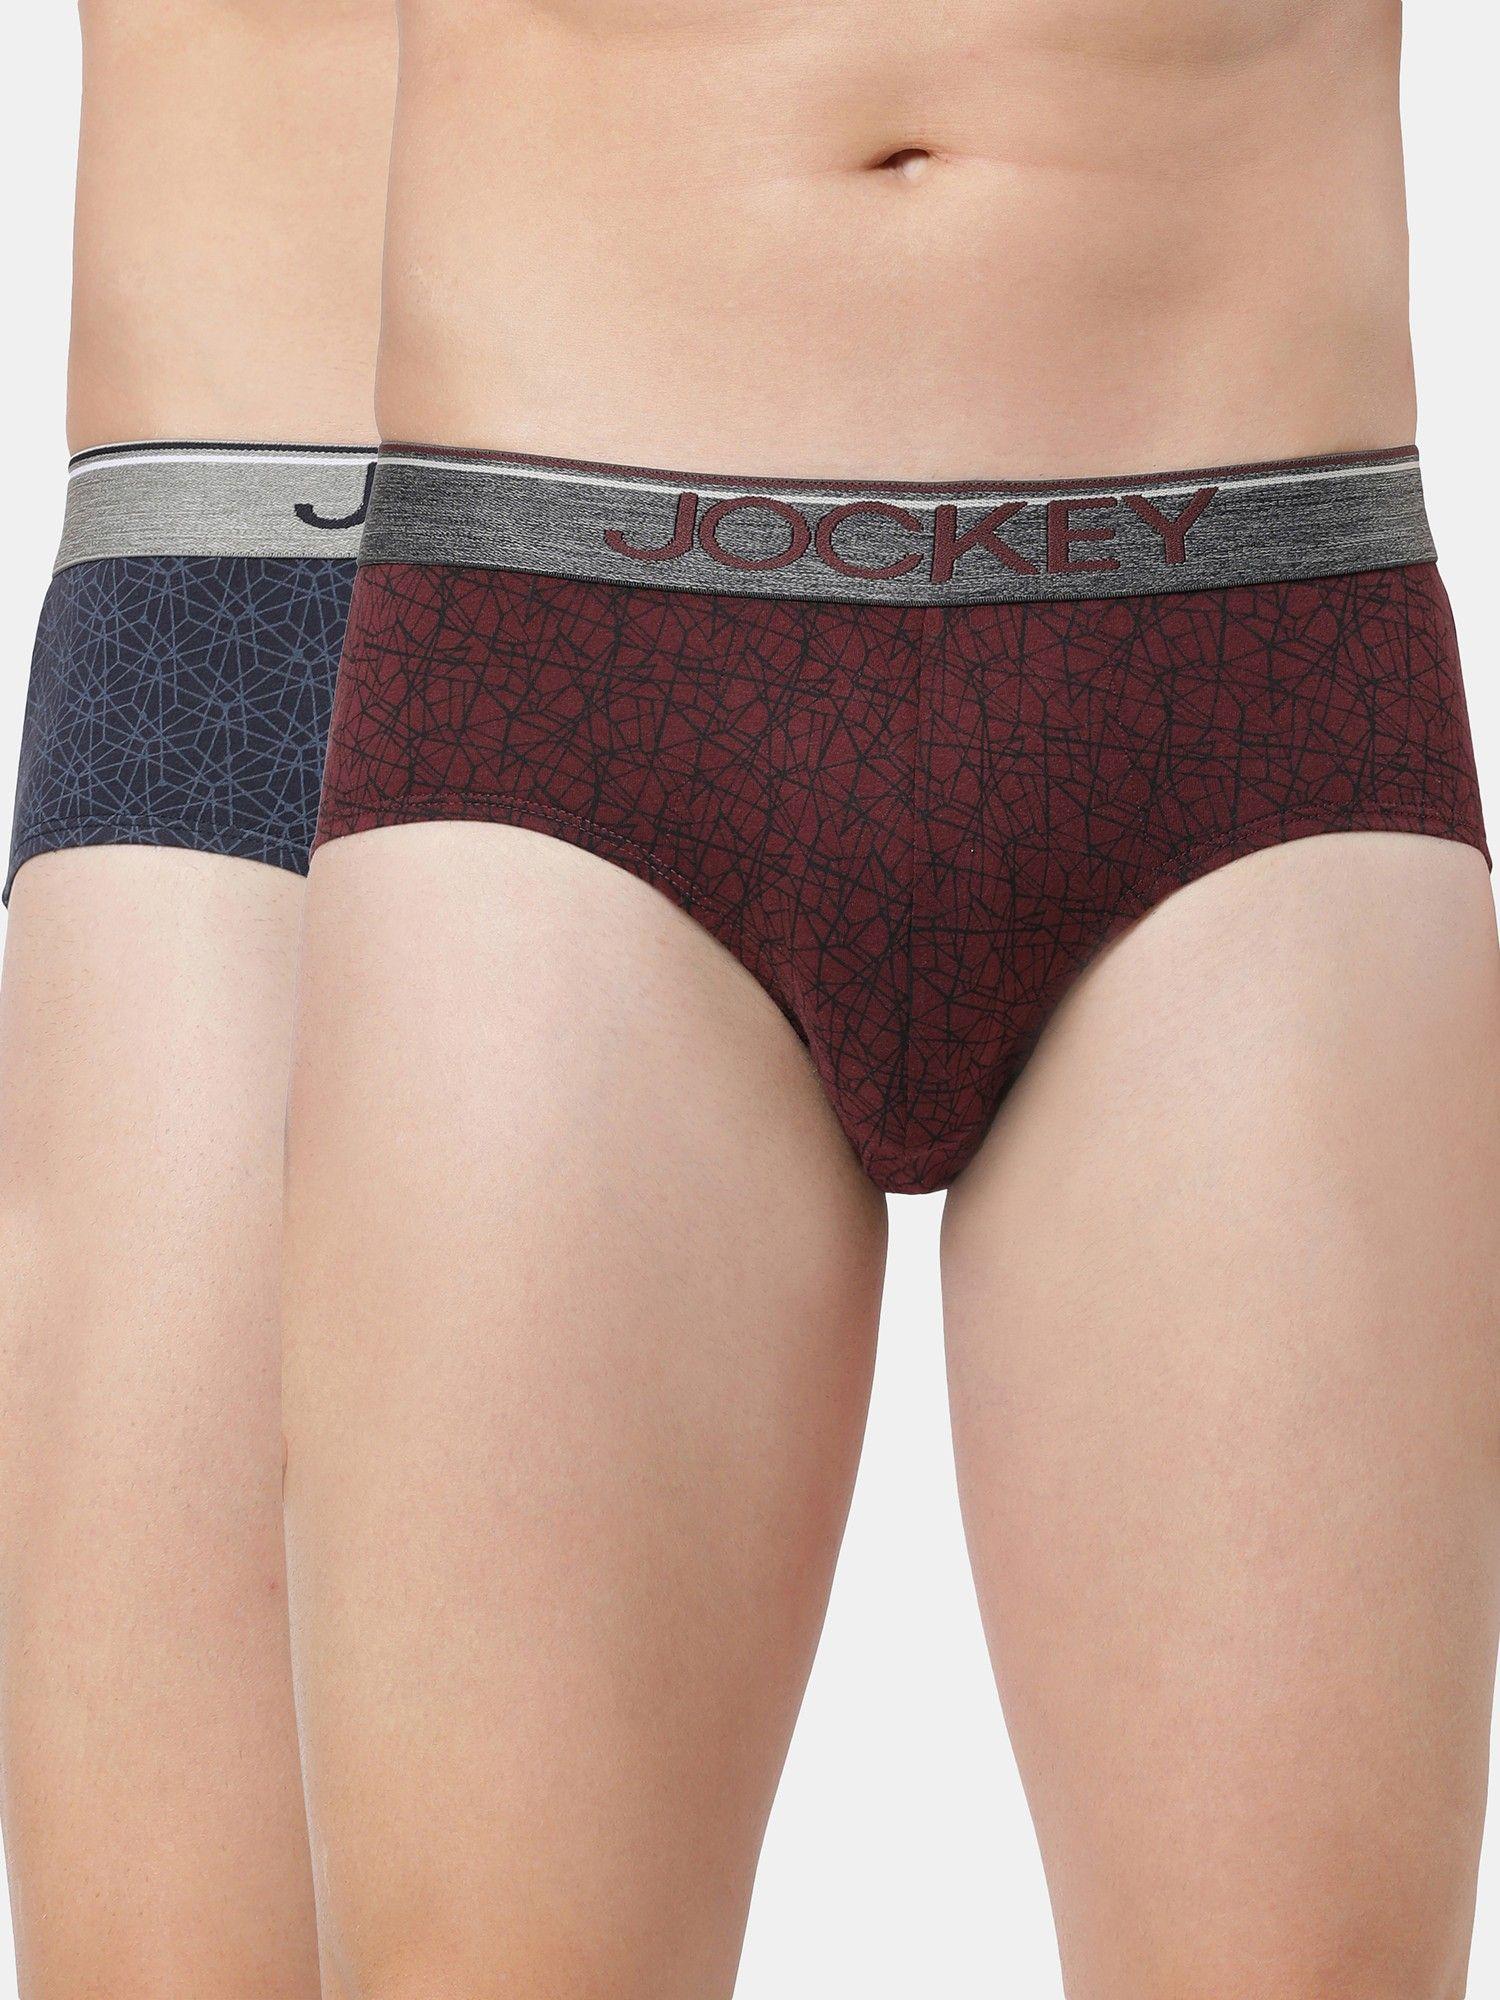 mc09 men cotton brief with ultrasoft waistband - assorted (pack of 2)